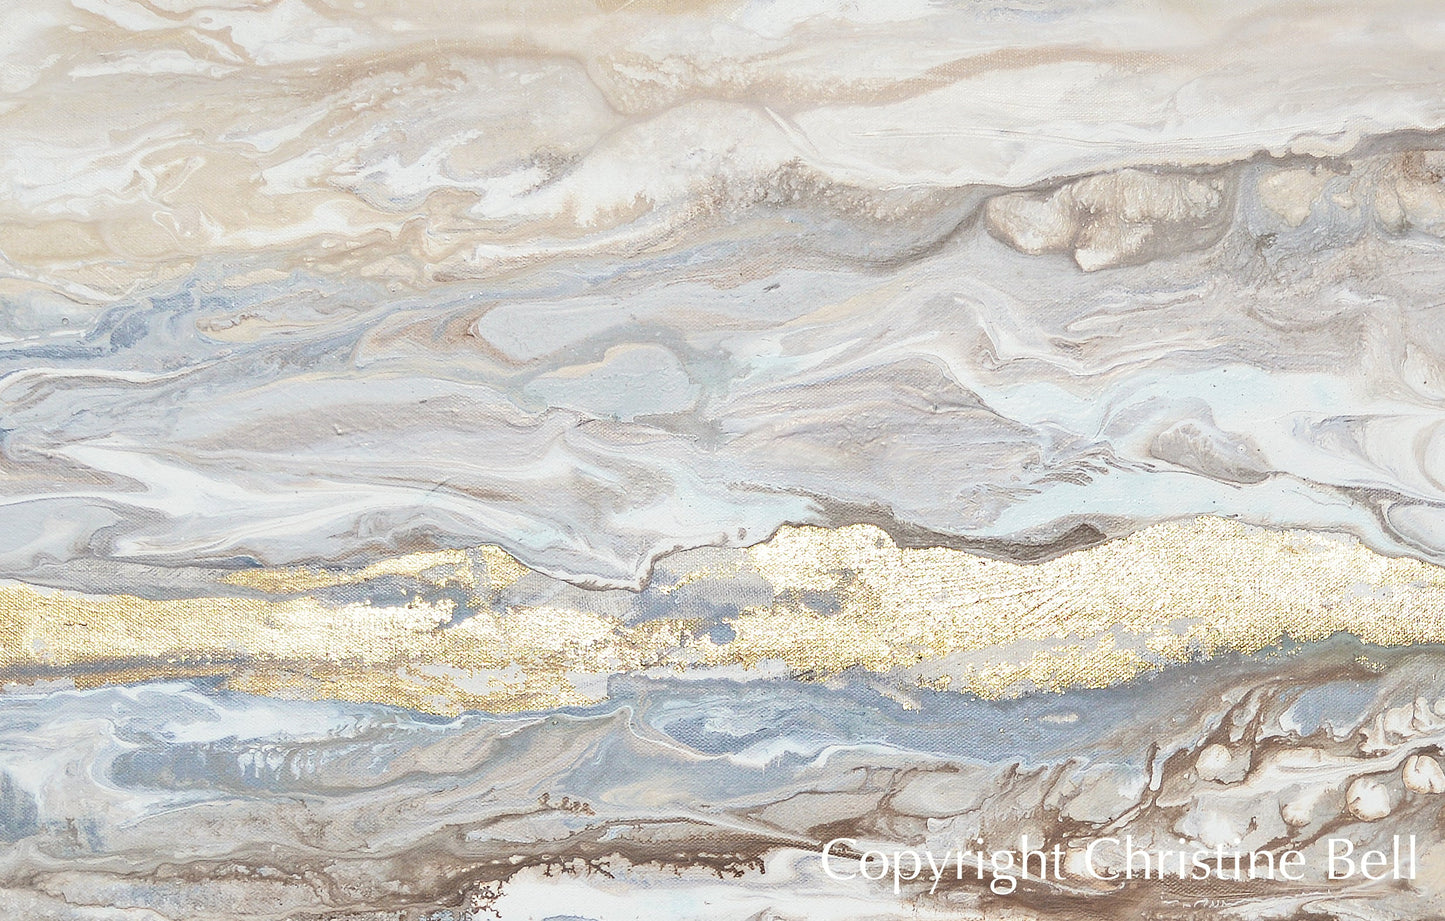 "Ingrained in My Soul" GICLEE PRINT FRAMED CANVAS Art Abstract Painting Neutral White Beige Gold Leaf Marbled Coastal